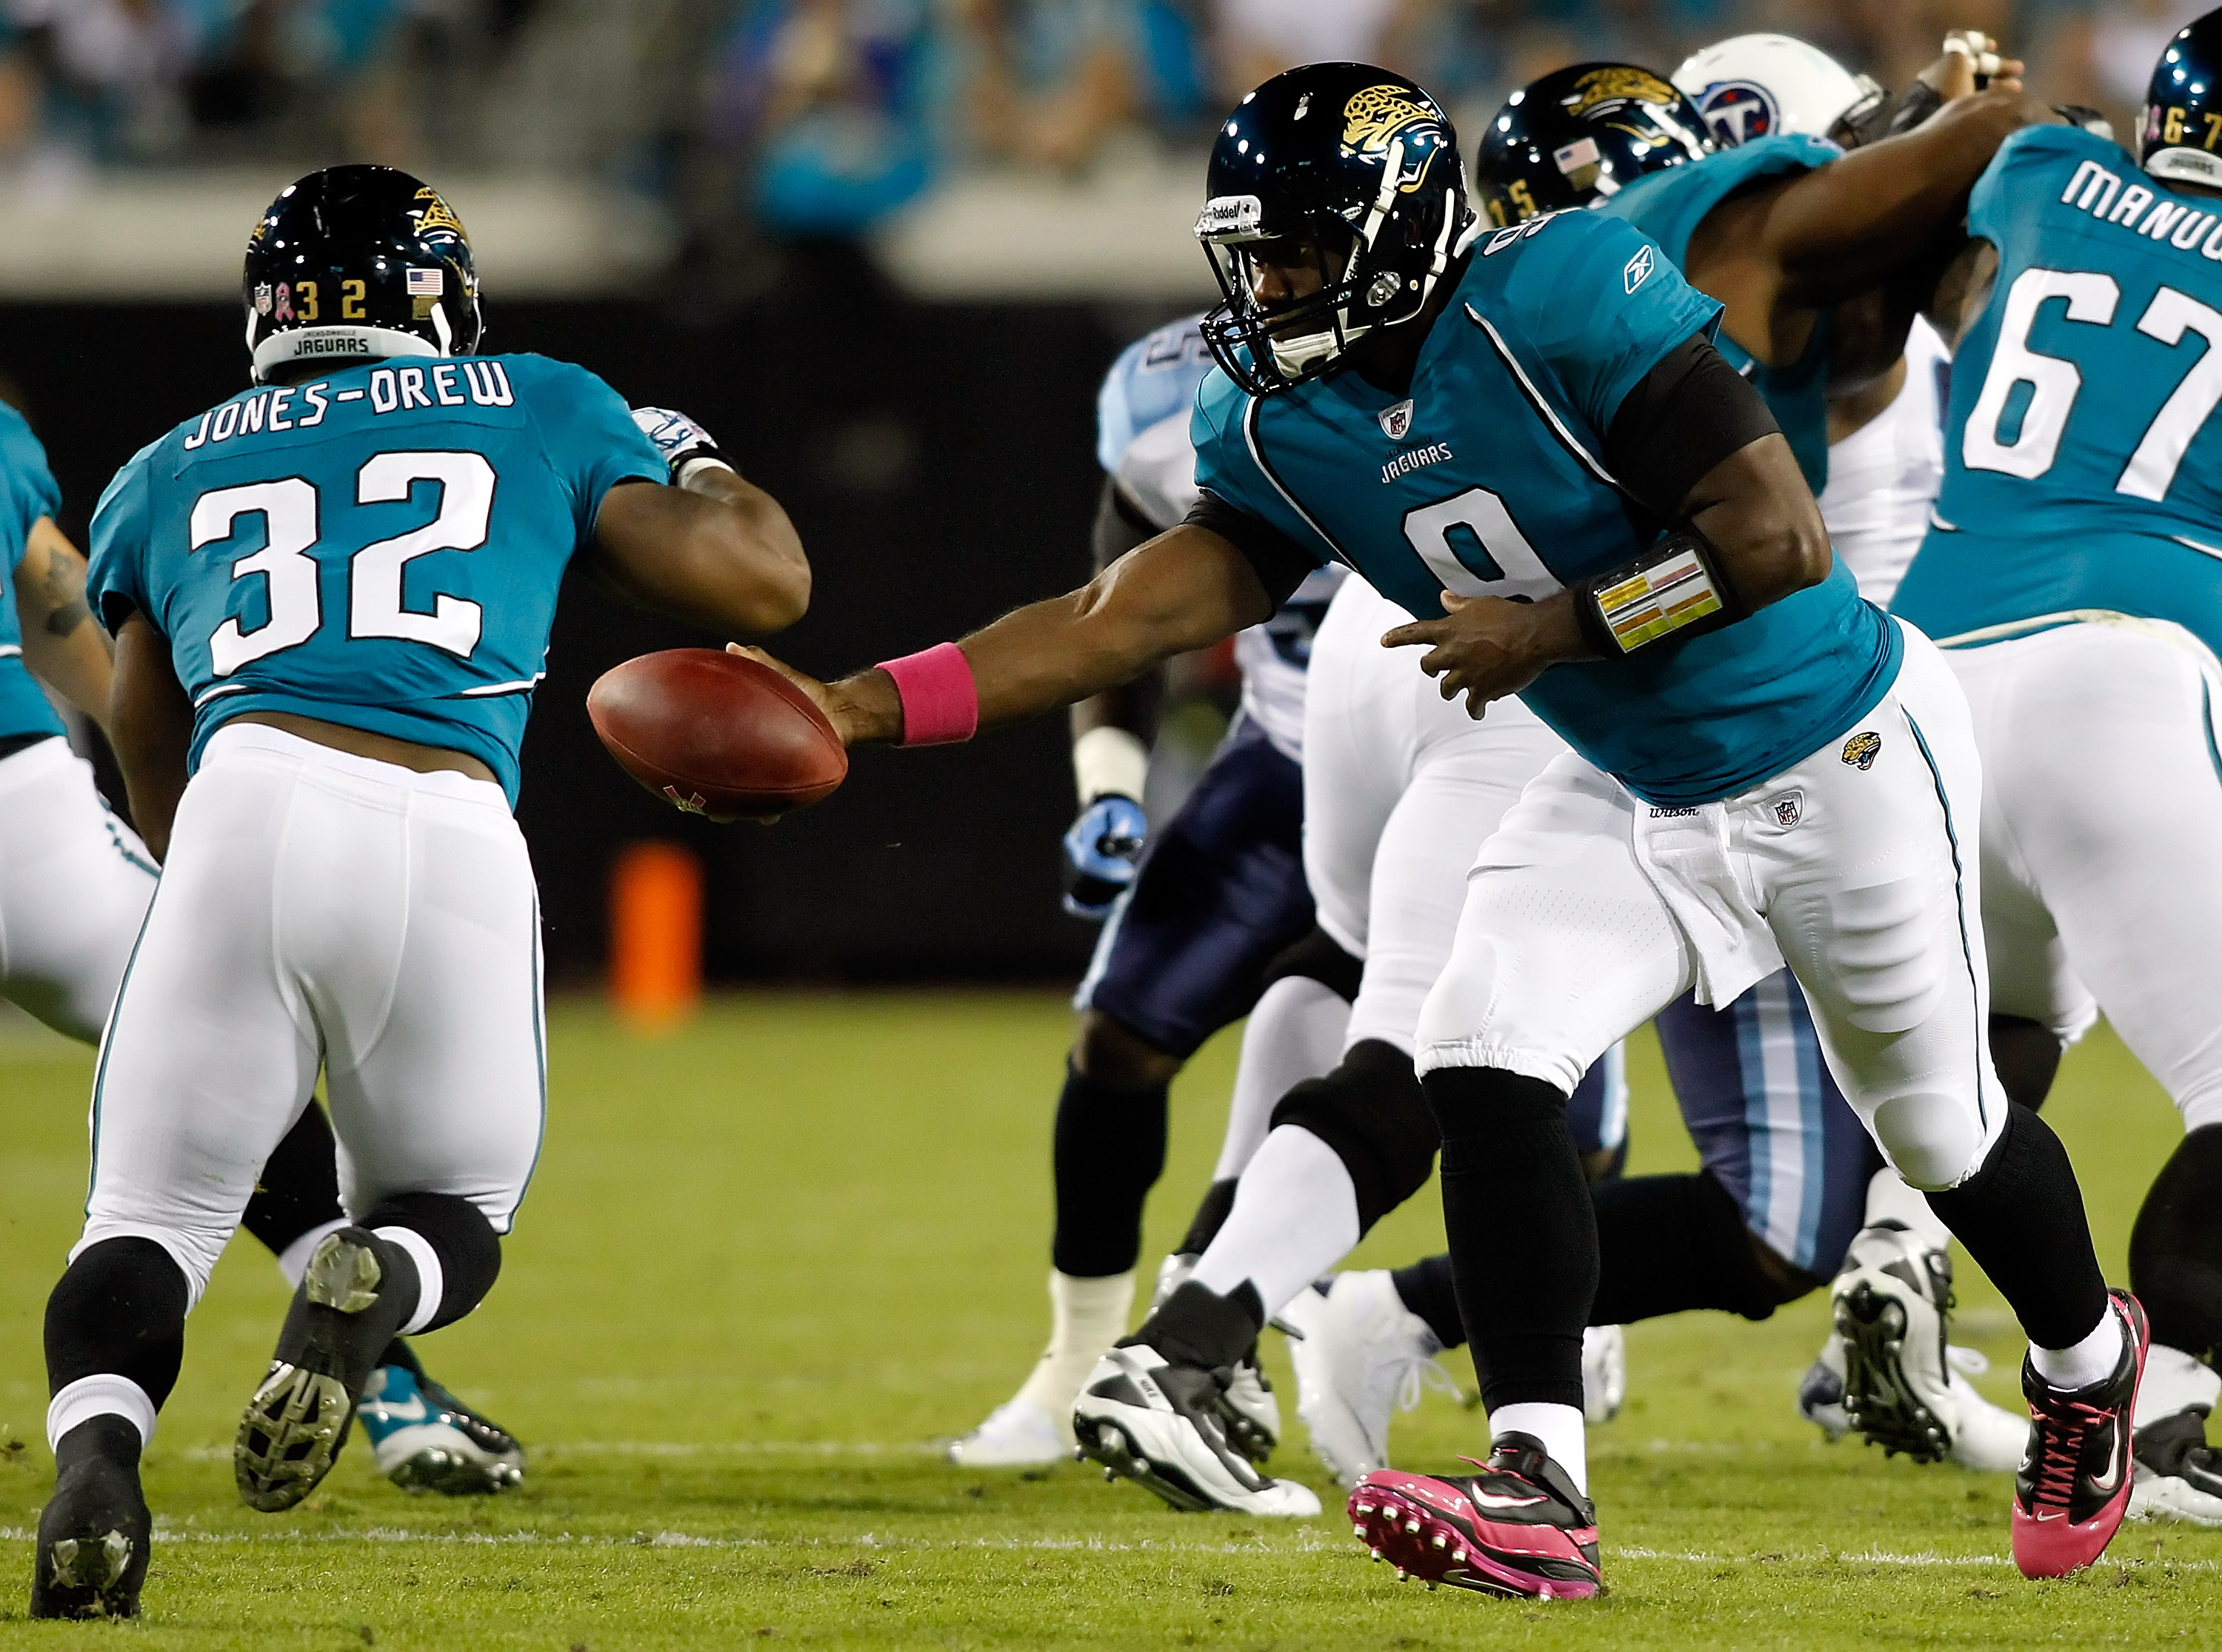 If Jacksonville is going to be successful this year it will have to be by running the ball.